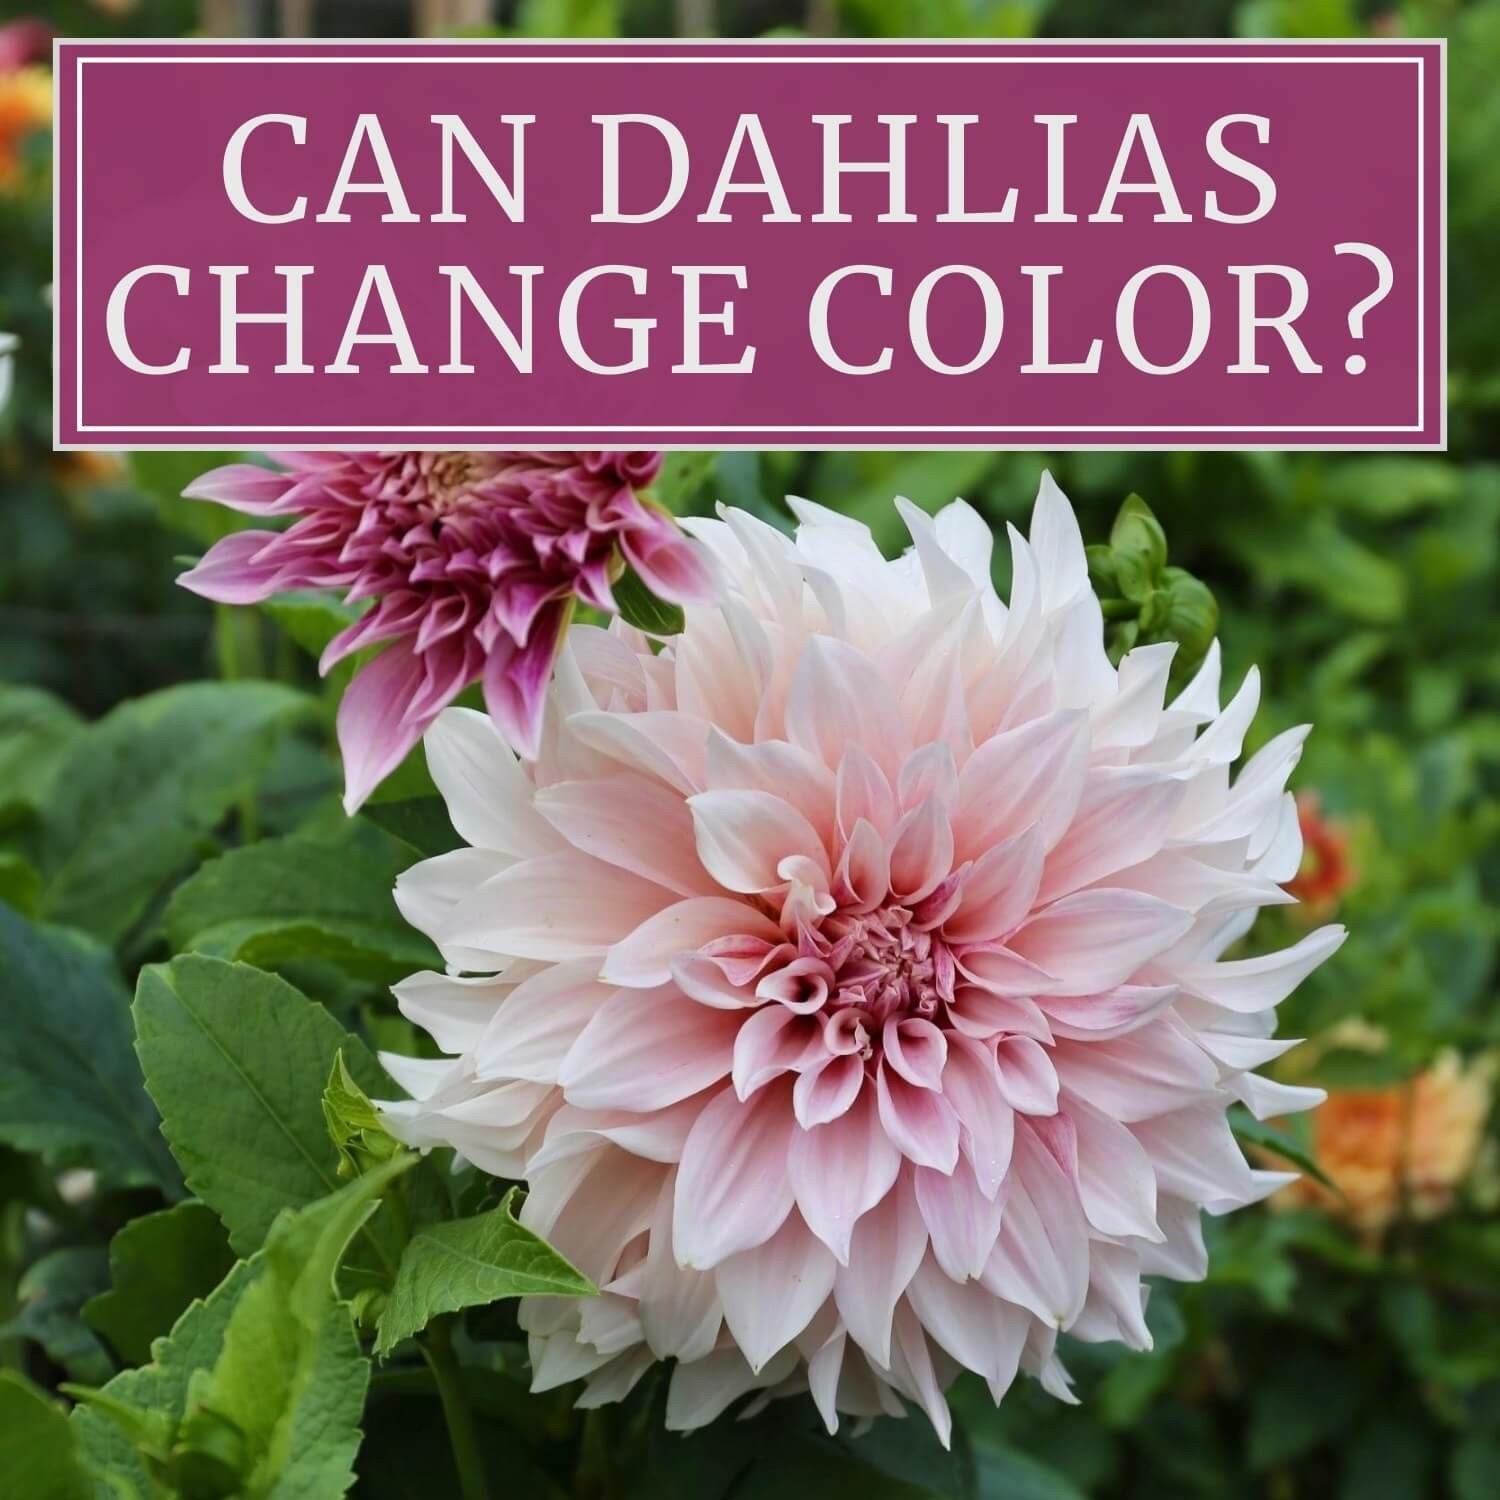 The Best Options for Staking Dahlias